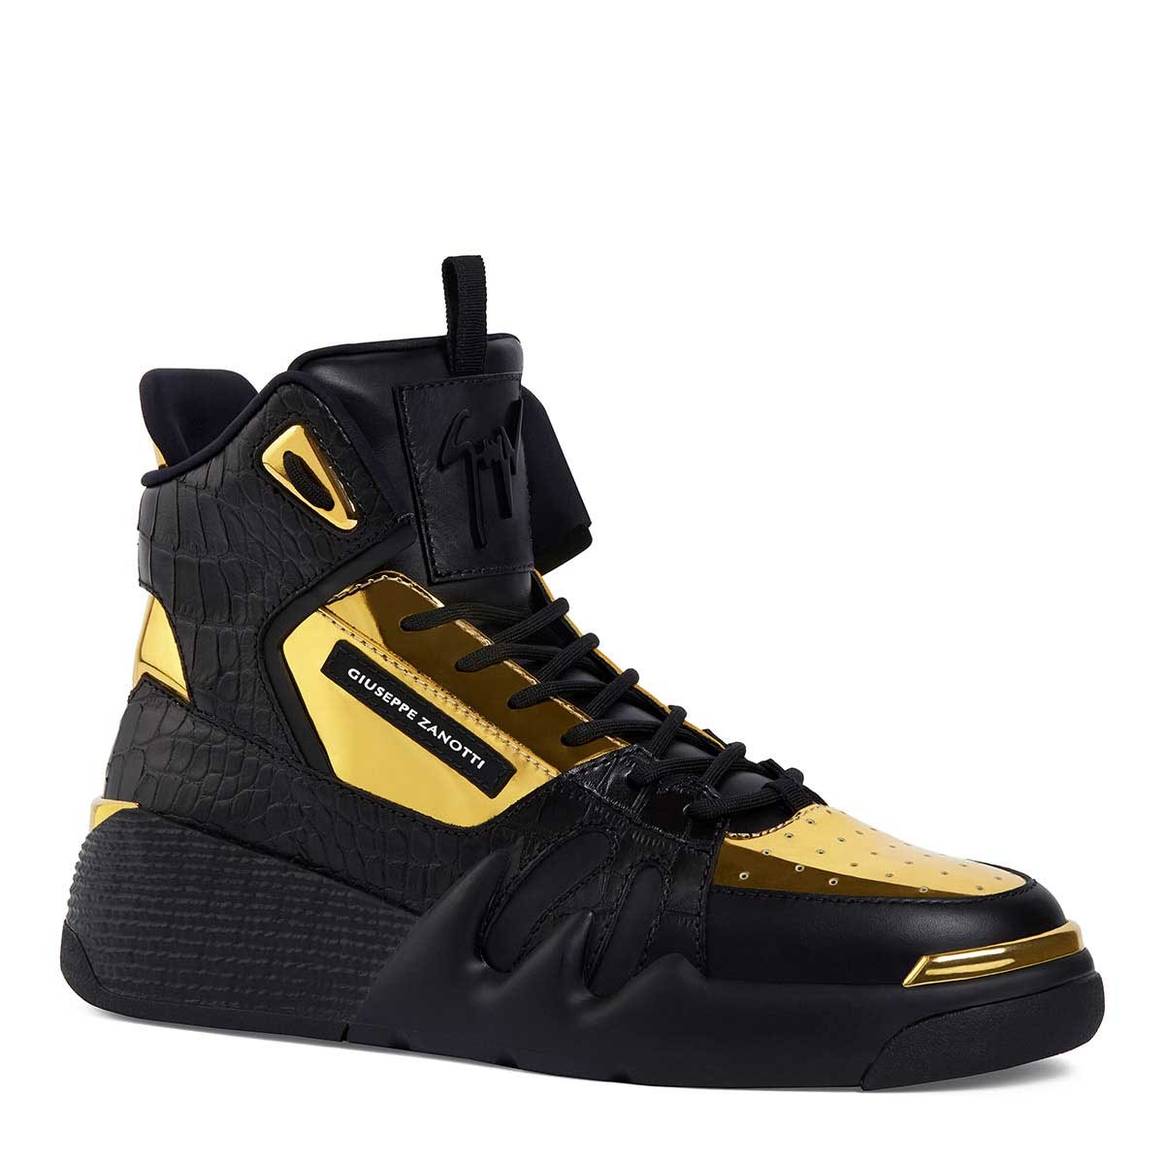 Giuseppe Zanotti launches trainer collection with exclusive style by Joshua Vides